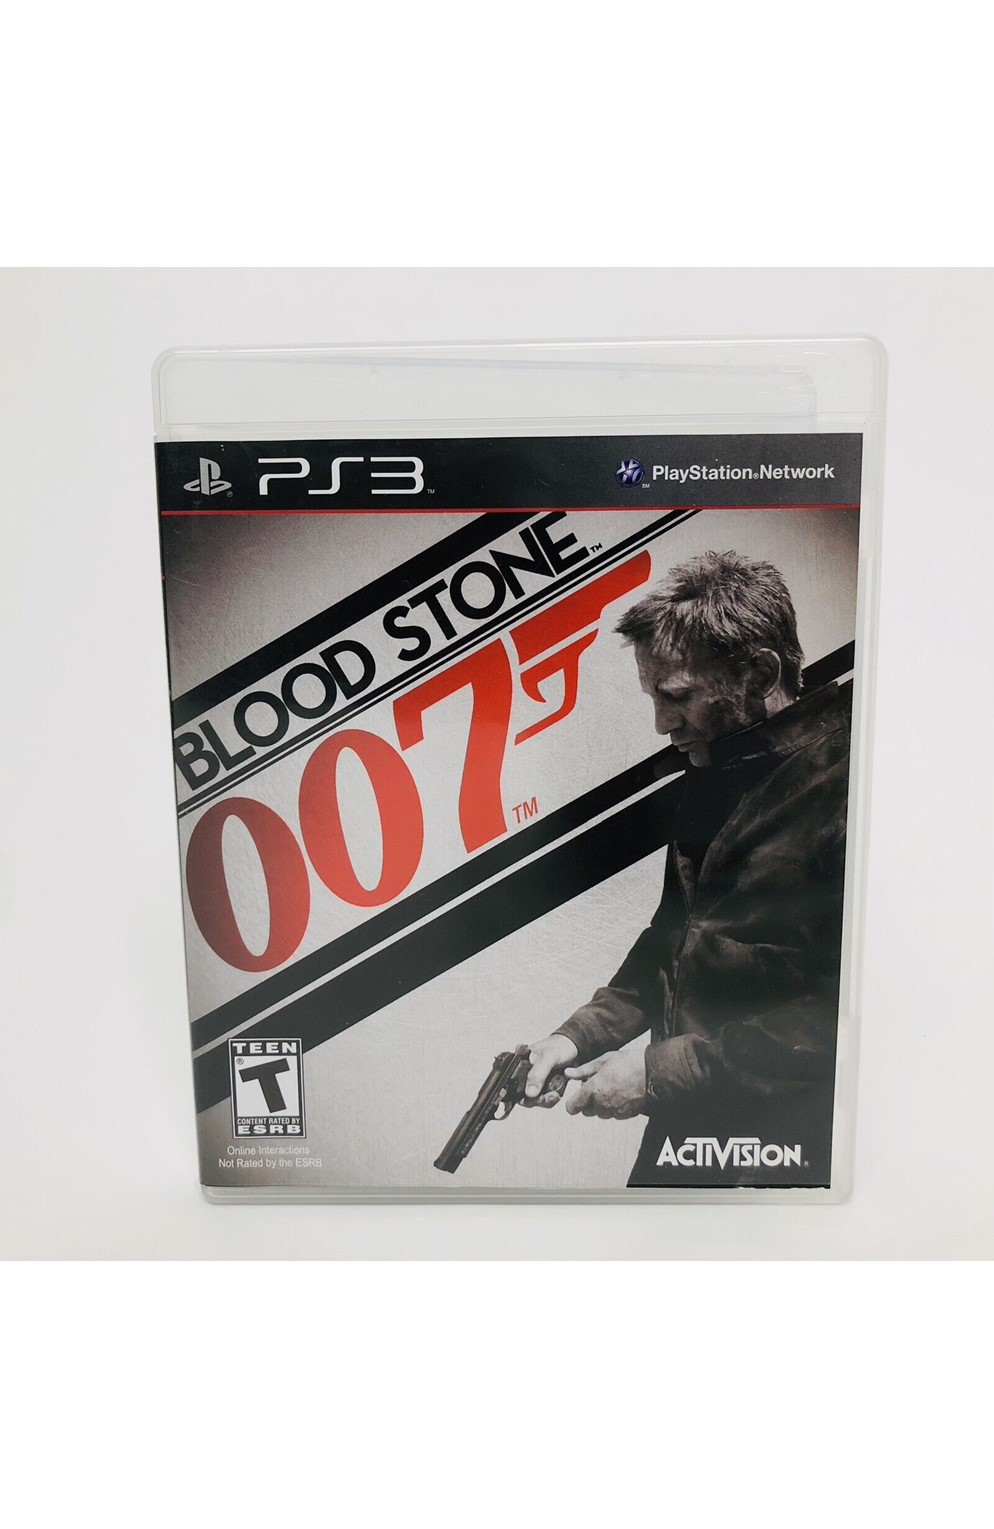 Playstation 3 Ps3 Blood Stone 007